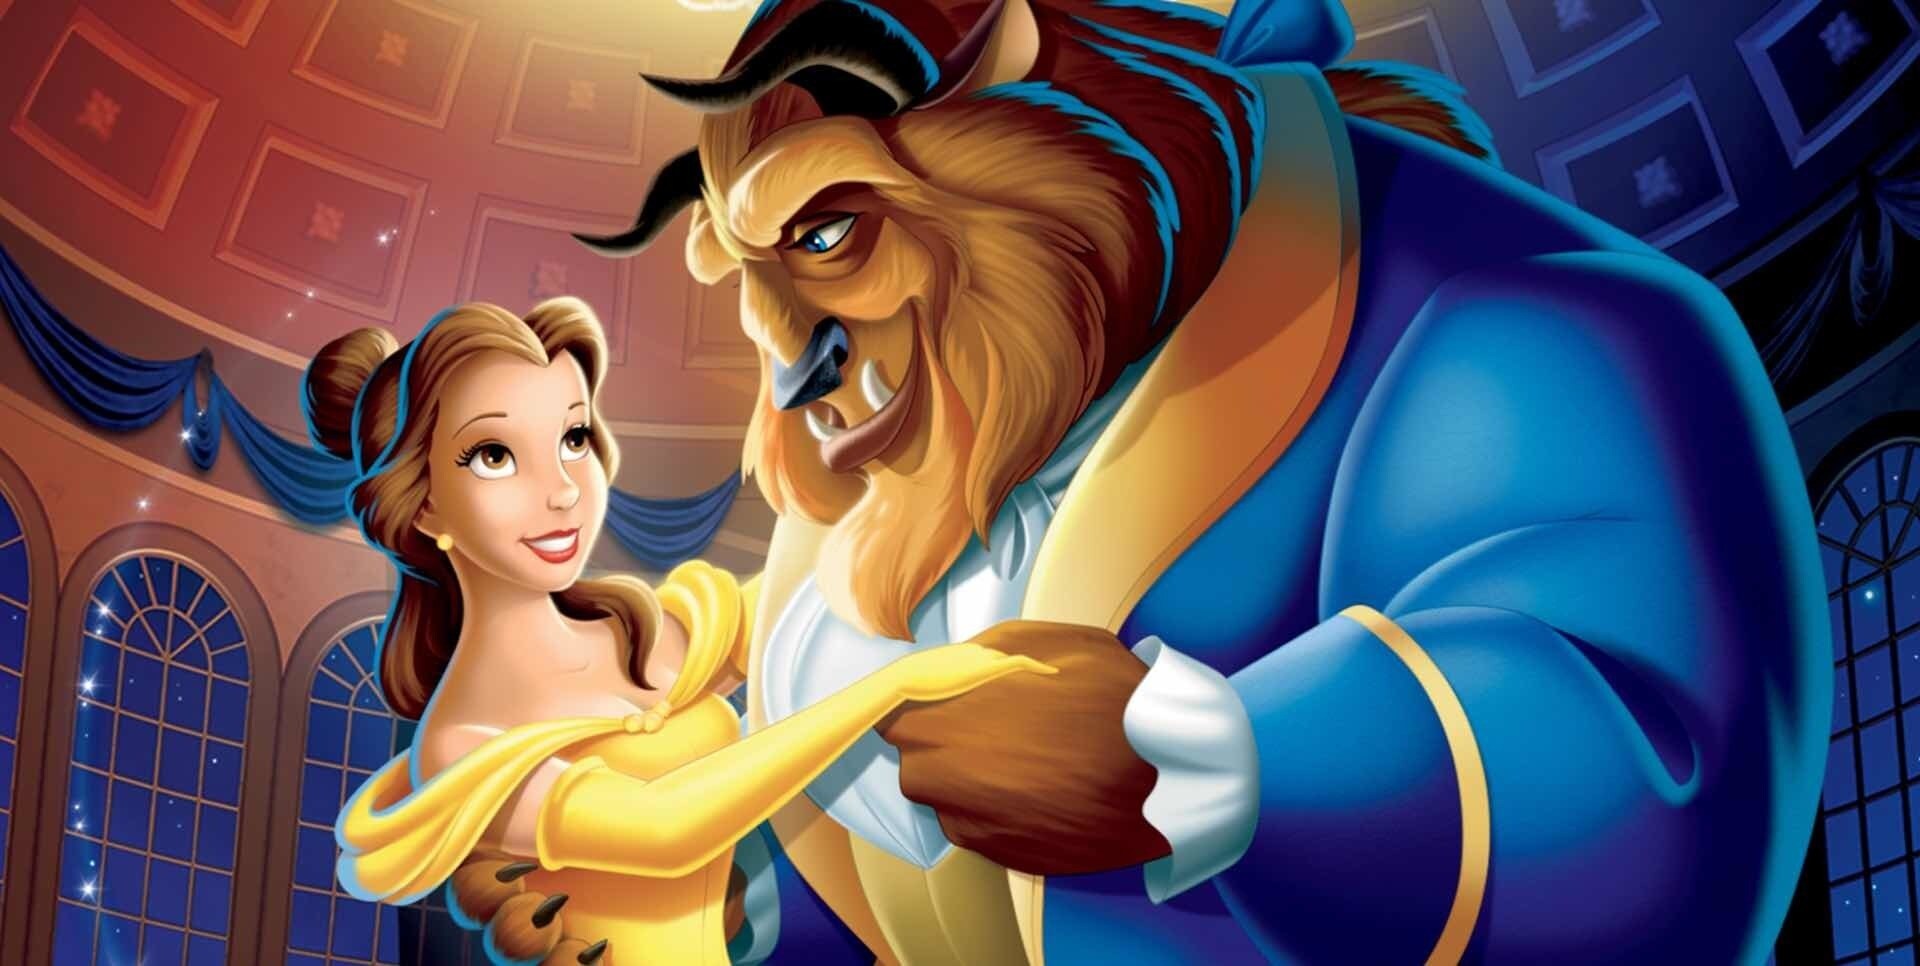 A still image from Beauty and the Beast